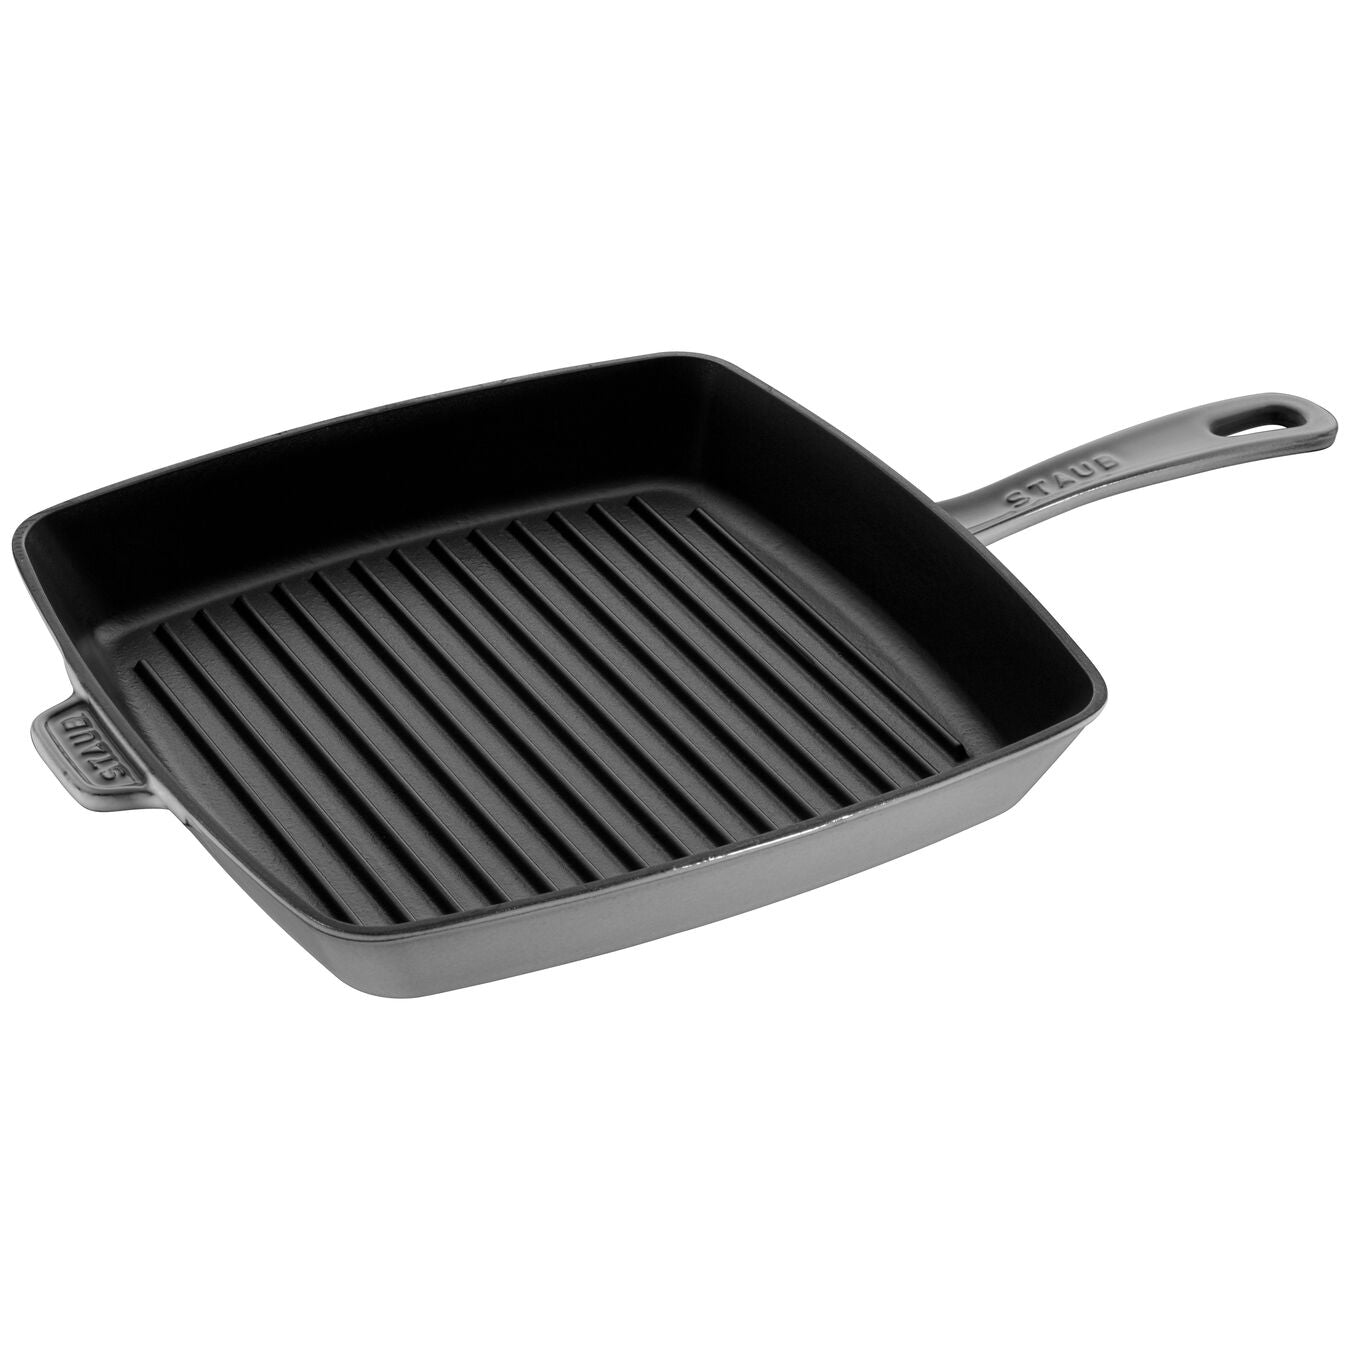 Staub Grill Pans Square grill pan with one handle